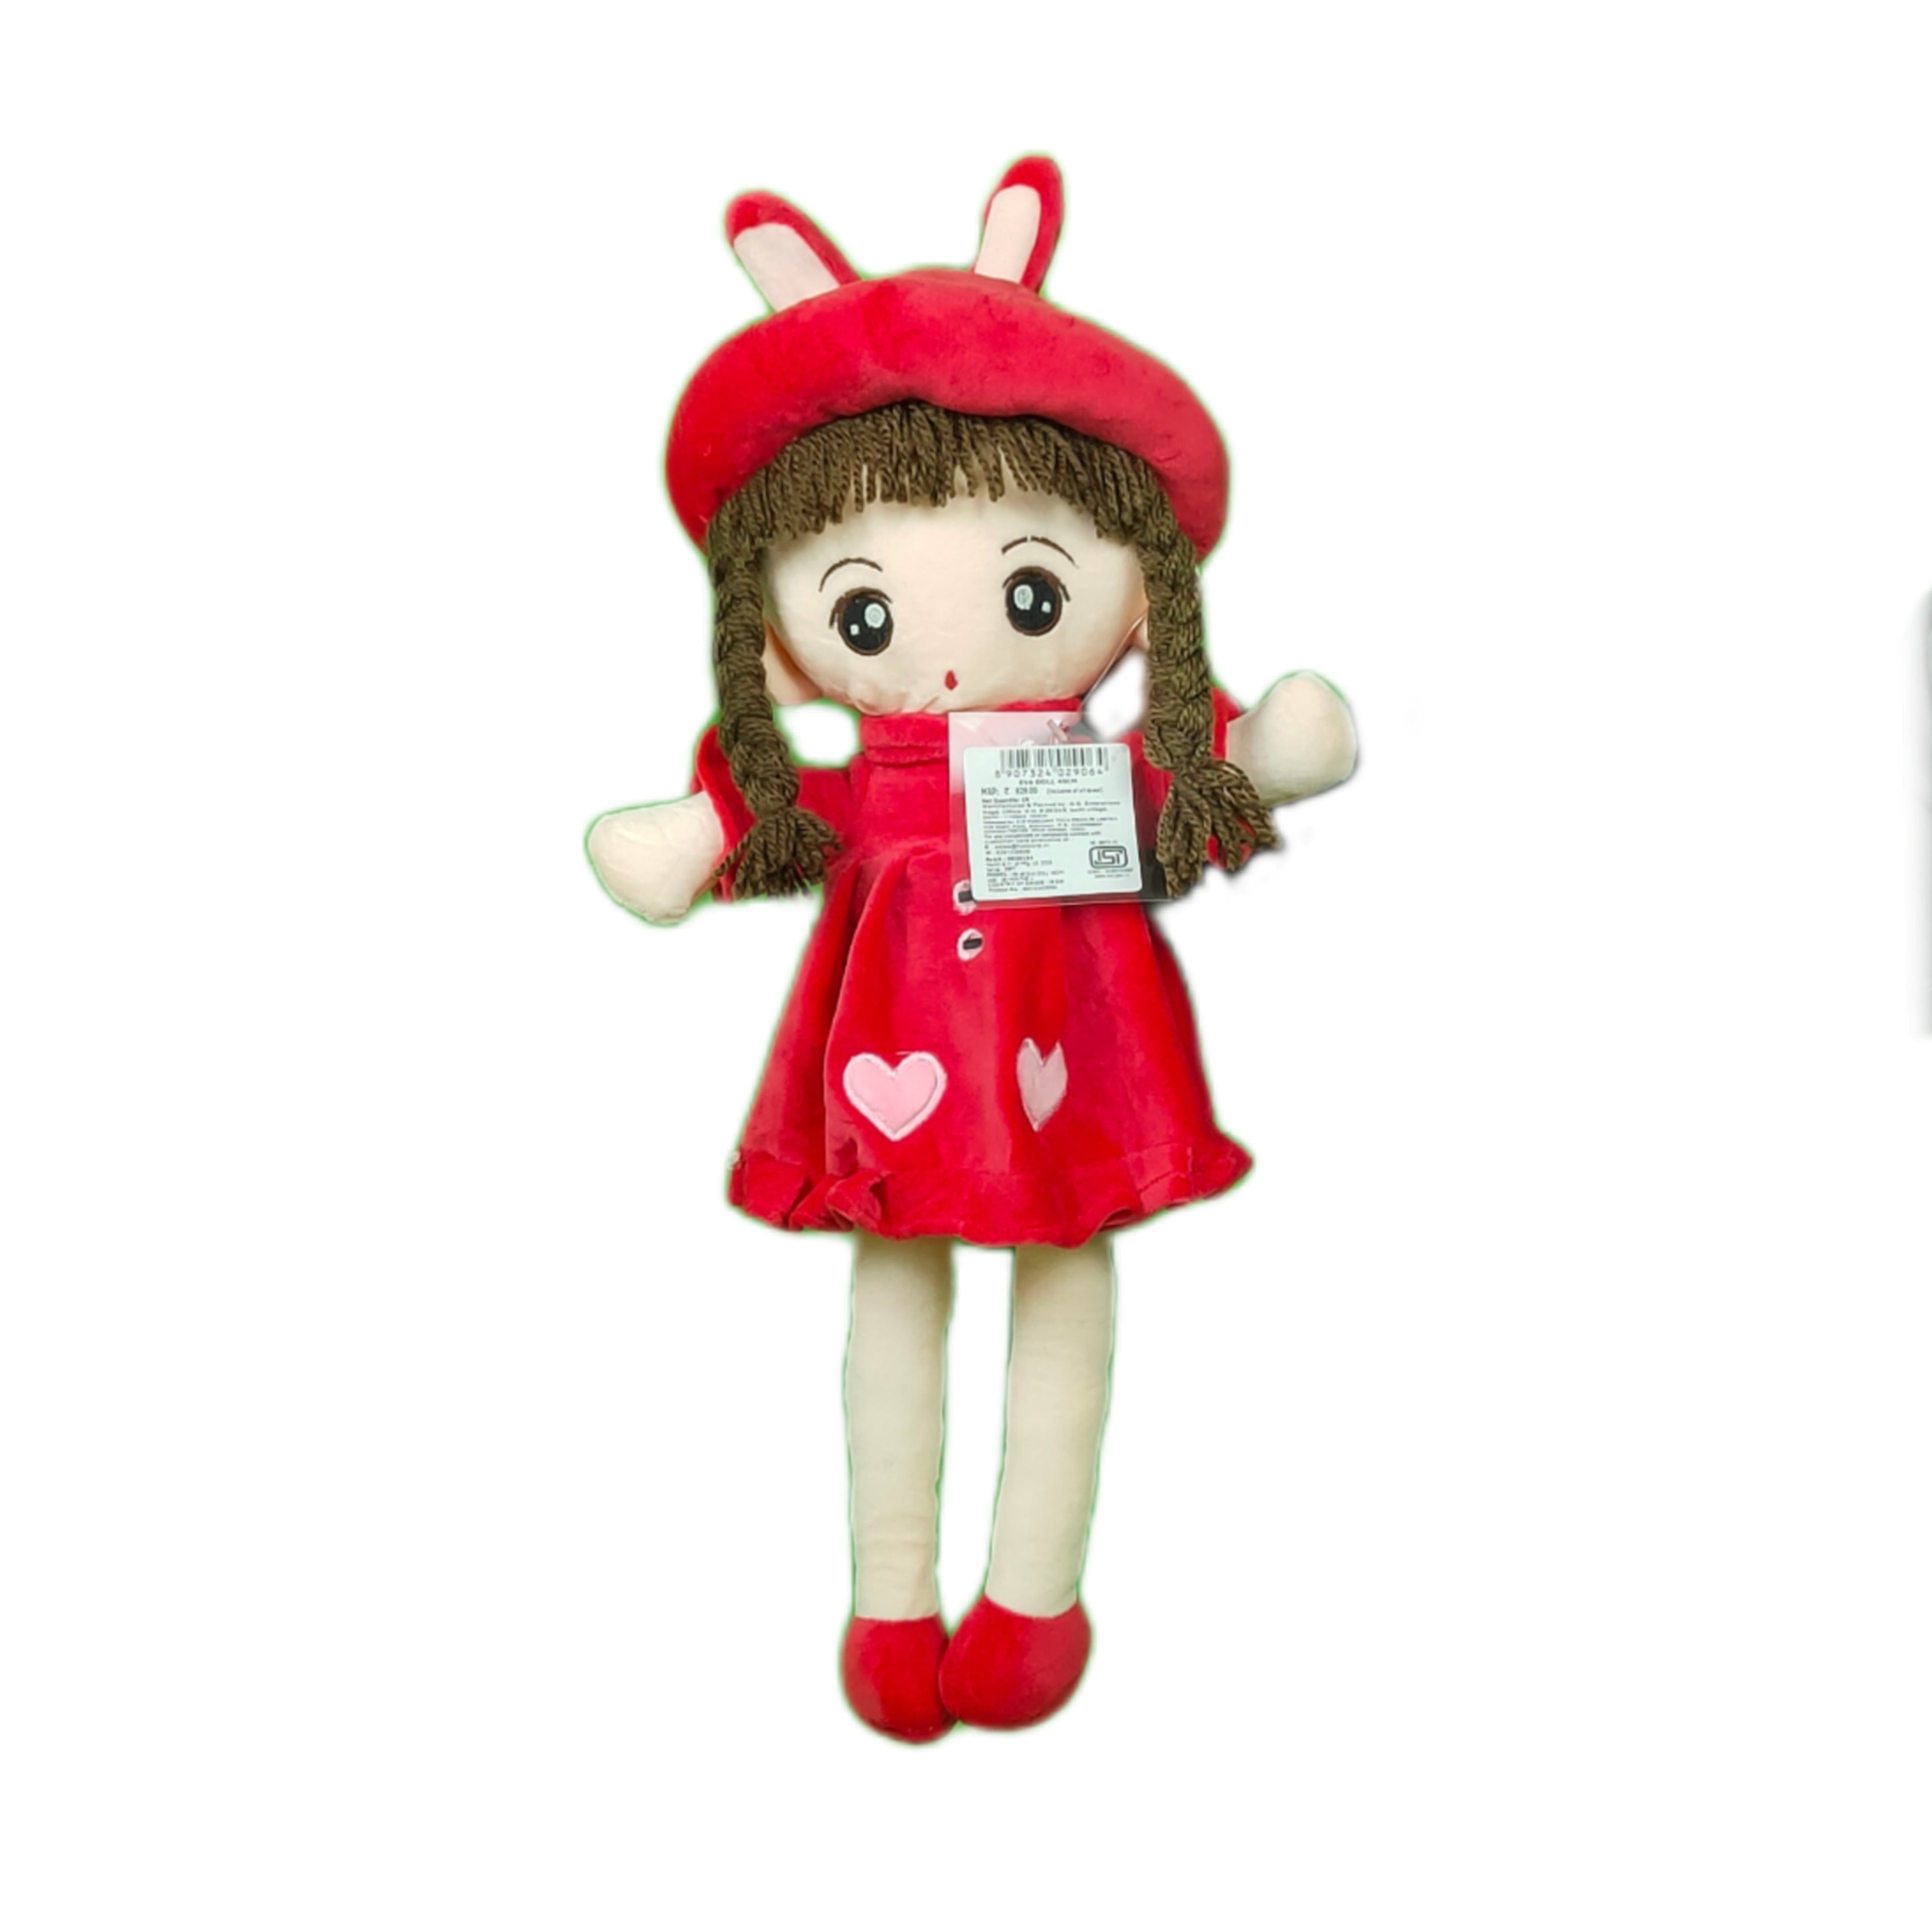 Play Hour Eva Rag Doll Plush Soft Toy Wearing Red Frock for Ages 3 Years and Up, 45cm